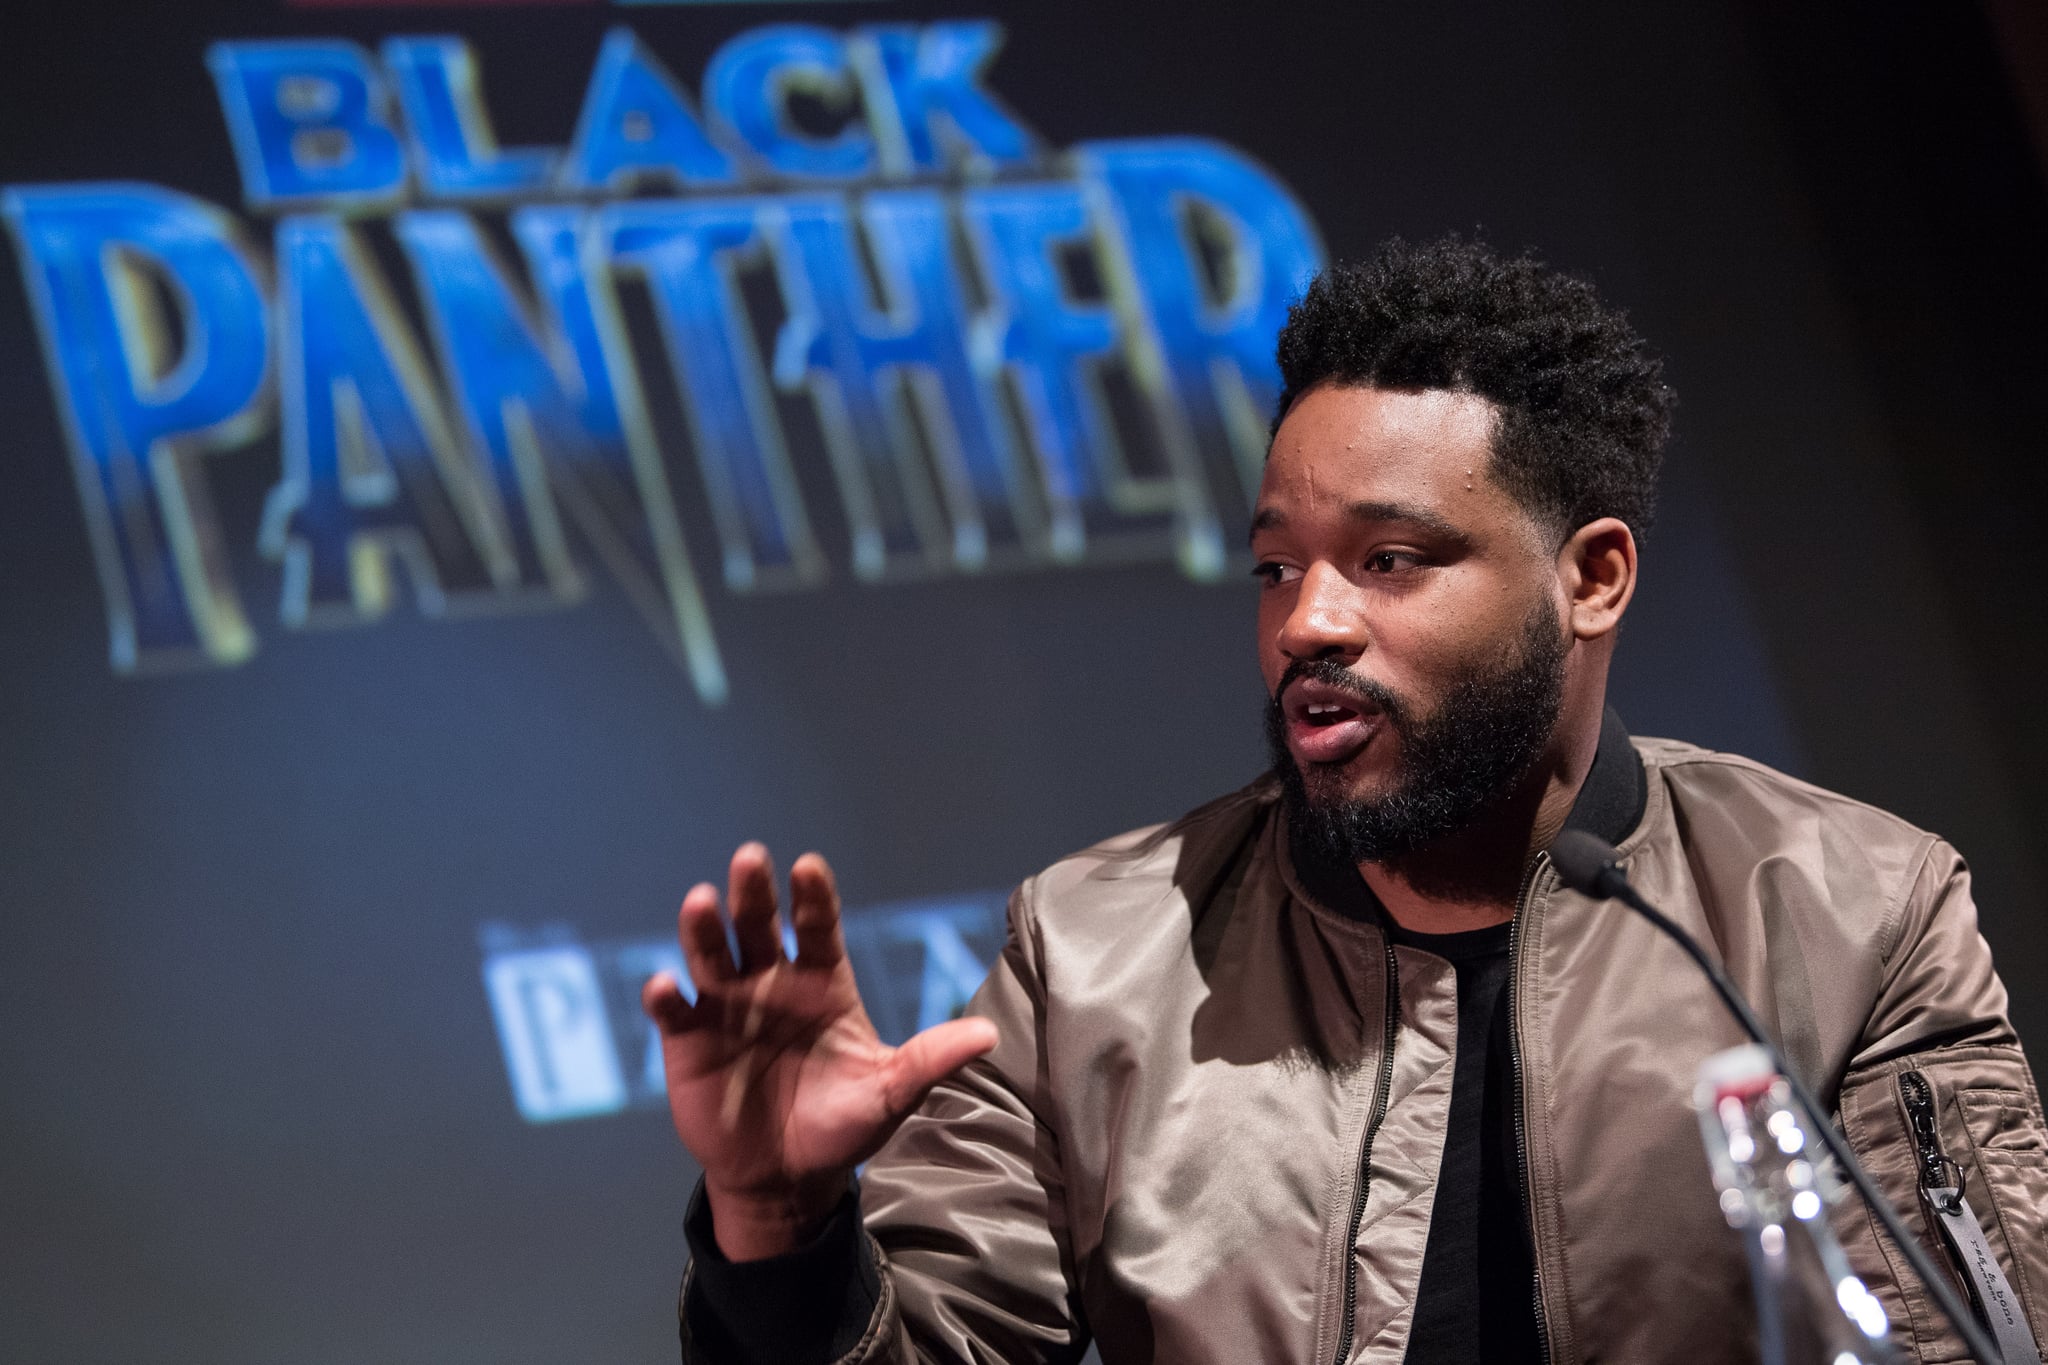 LONDON, ENGLAND - FEBRUARY 09:  Director Ryan Coogler attends the 'Black Panther' BFI preview screening held at BFI Southbank on February 9, 2018 in London, England.  (Photo by Jeff Spicer/Getty Images)